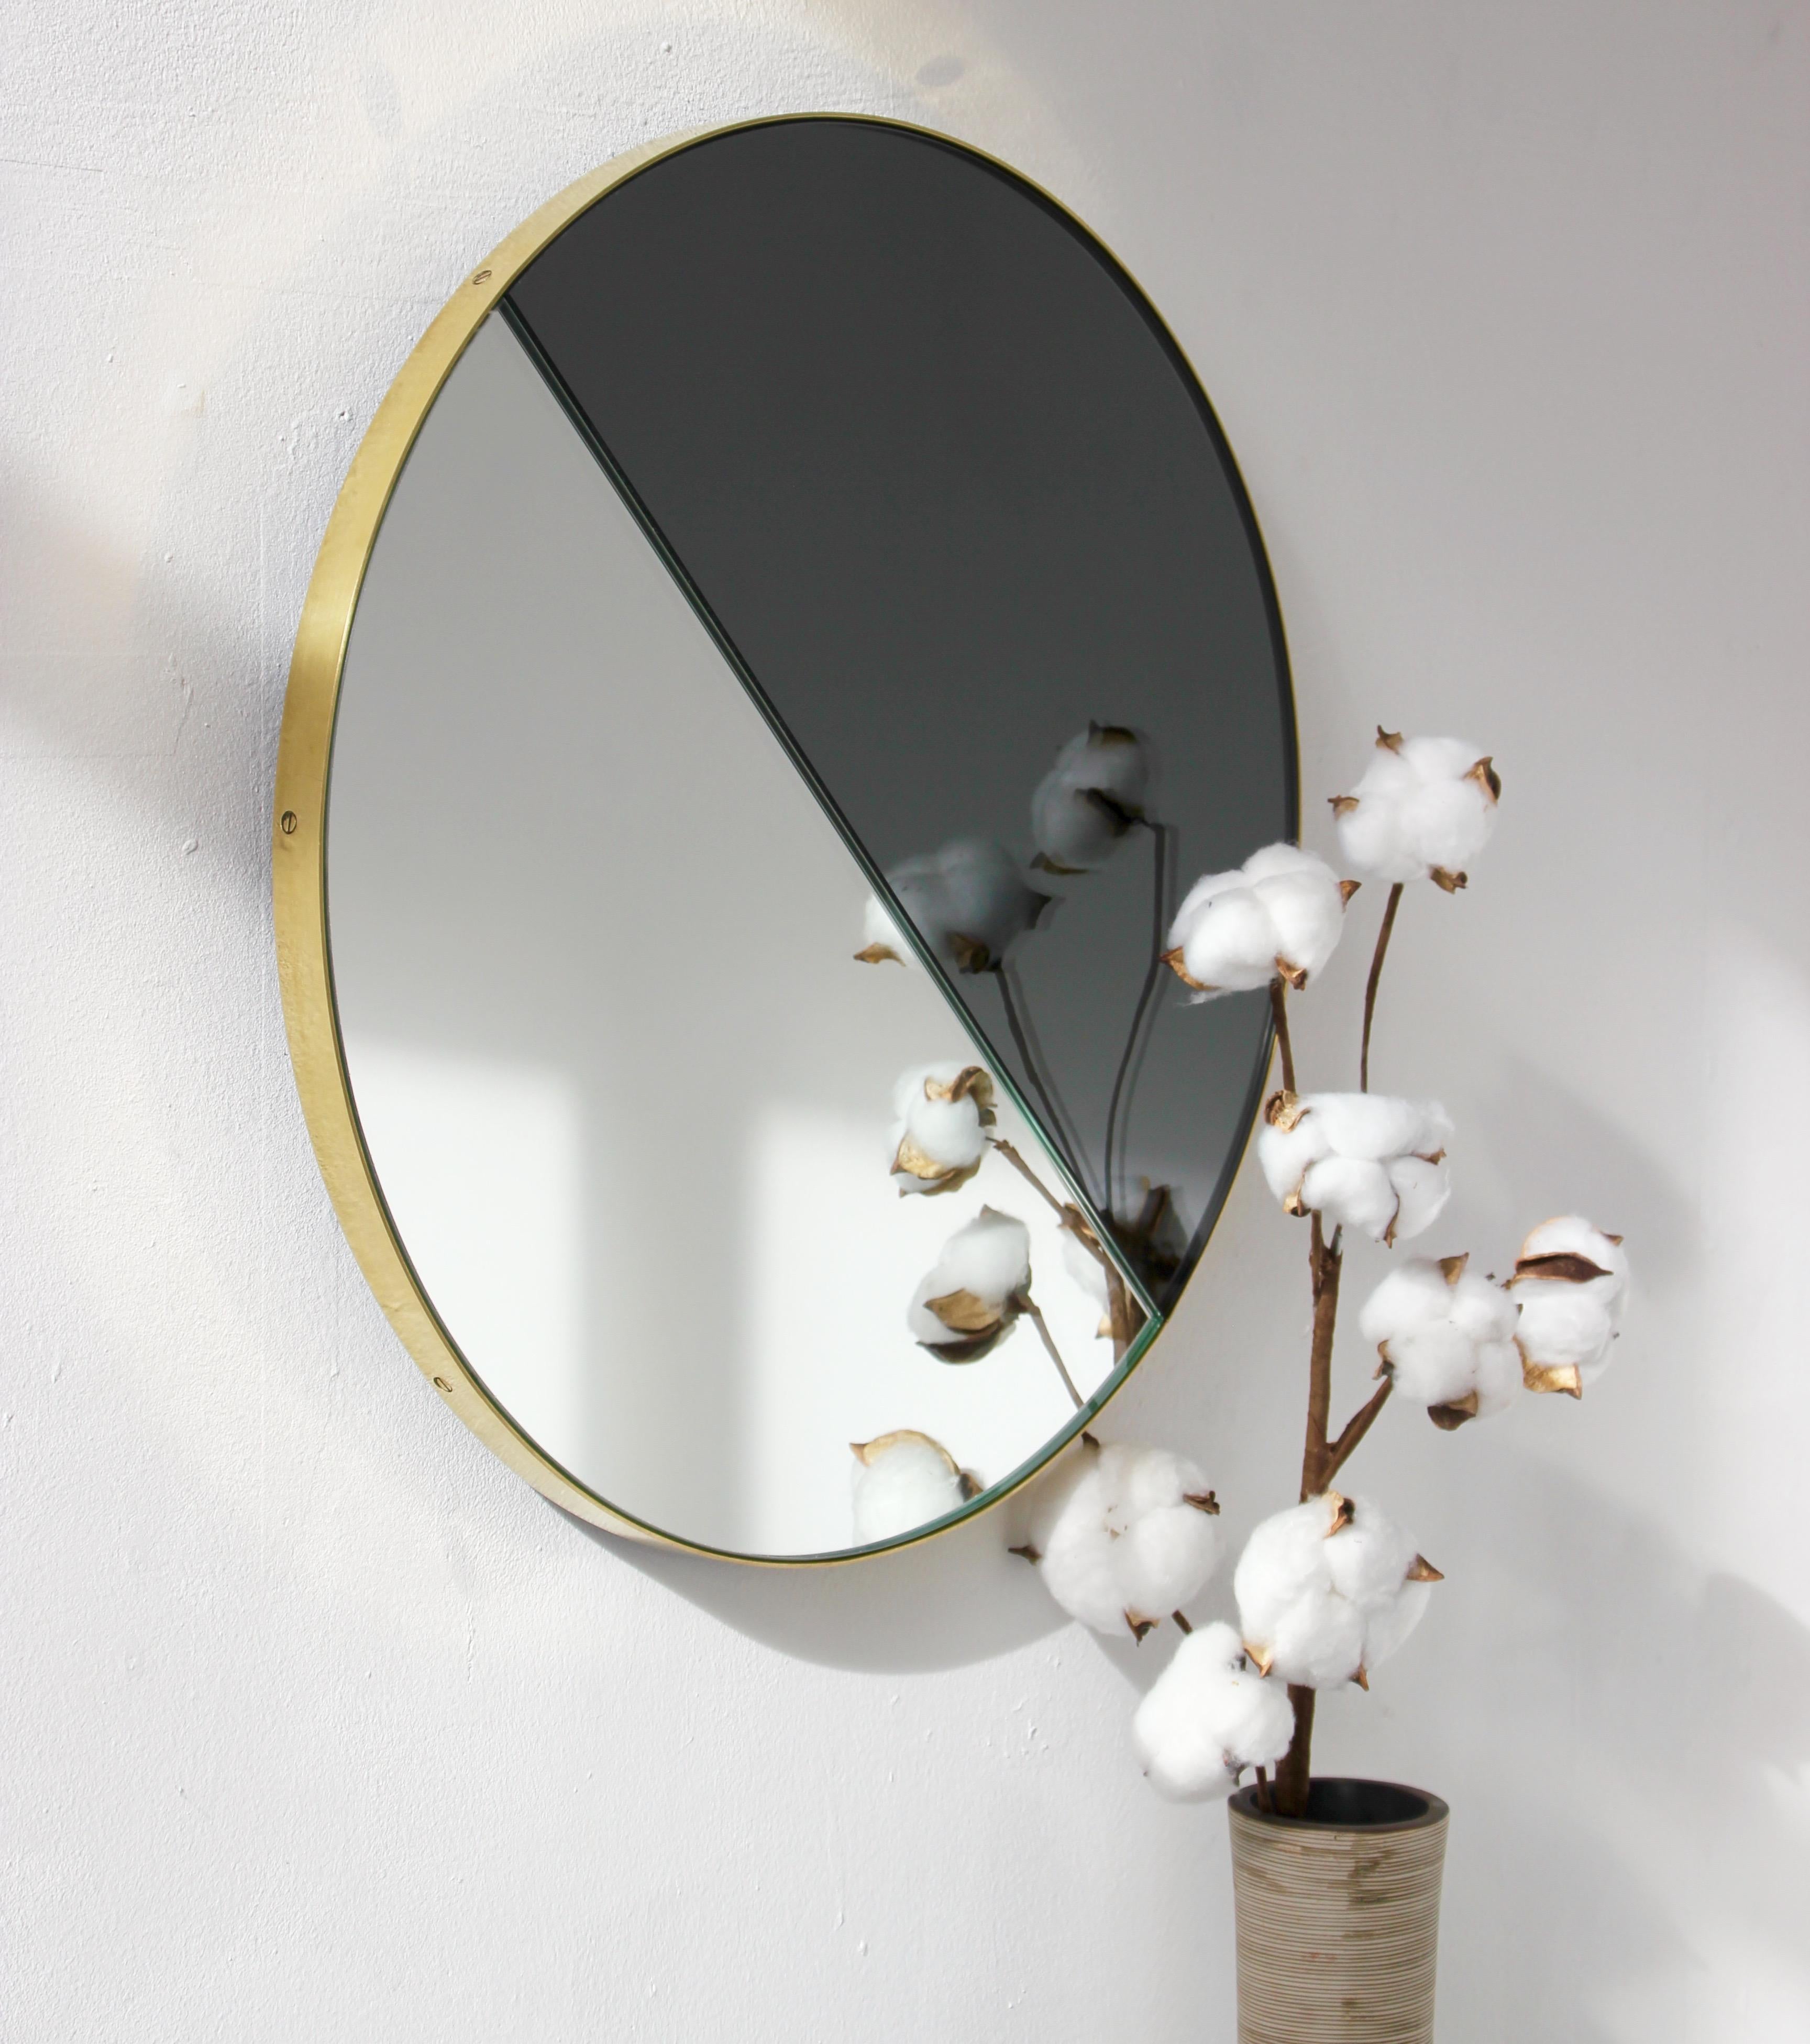 Brushed Orbis Dualis Mixed Tint Contemporary Round Mirror with Brass Frame, Medium For Sale